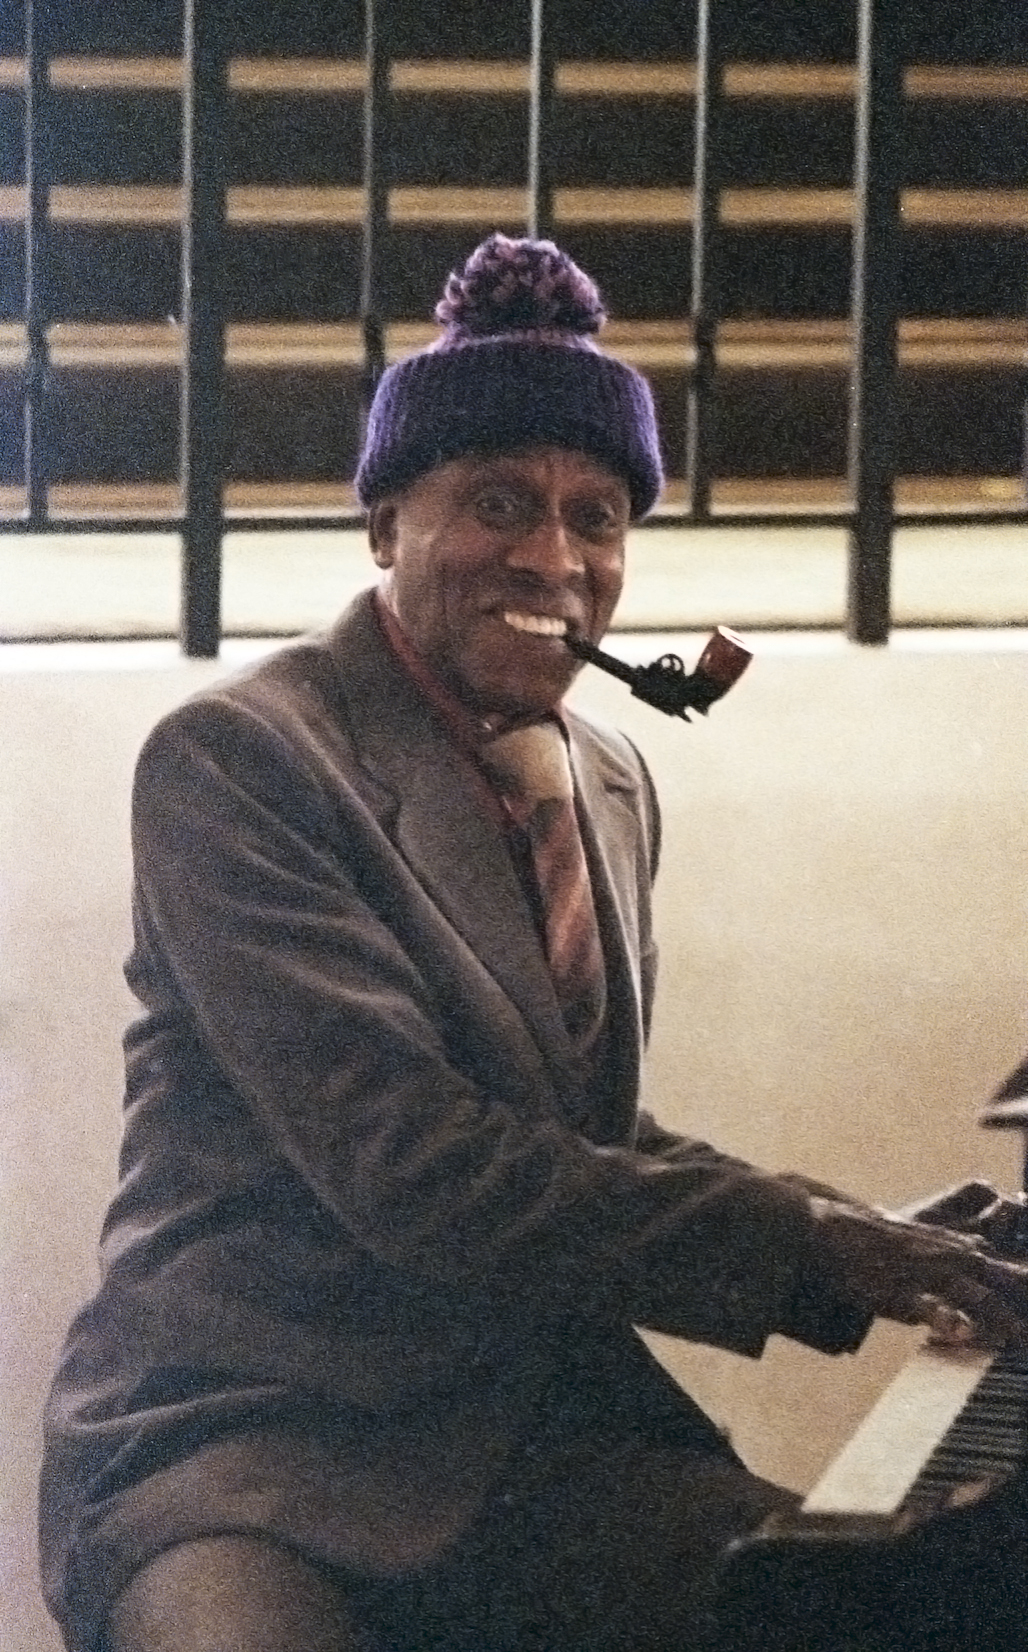 scatman-crothers-2016